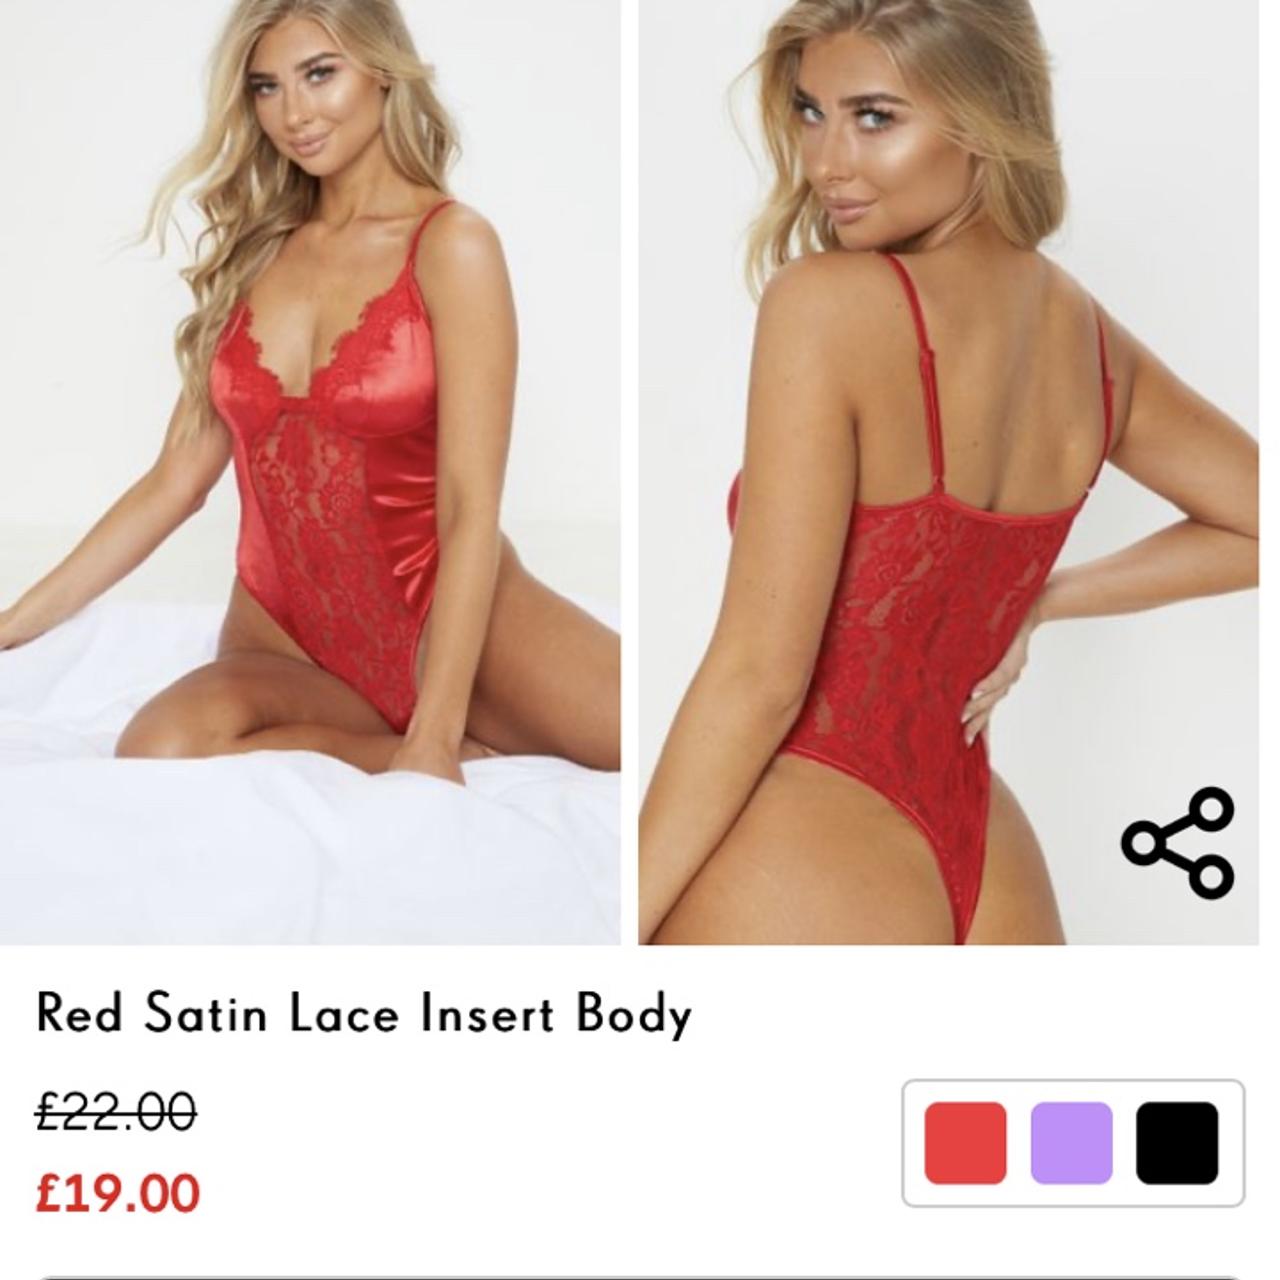 Red Satin Lace Insert Body, Lingerie